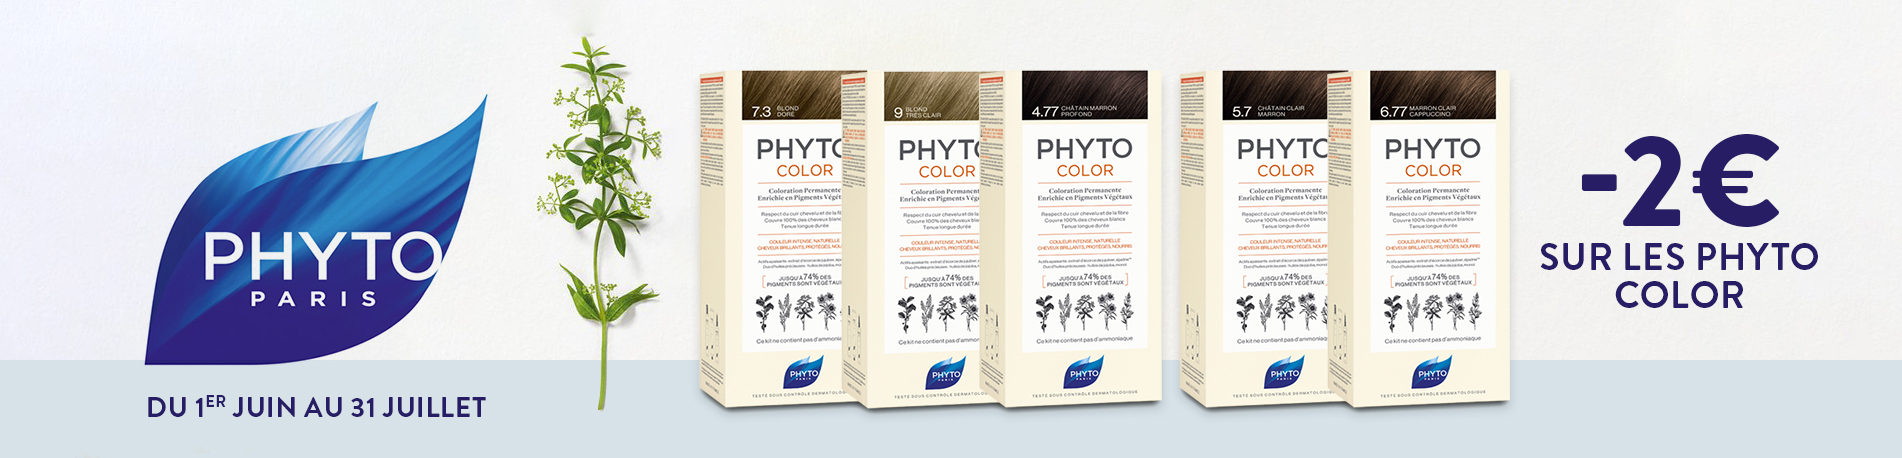 Promotion Phyto color